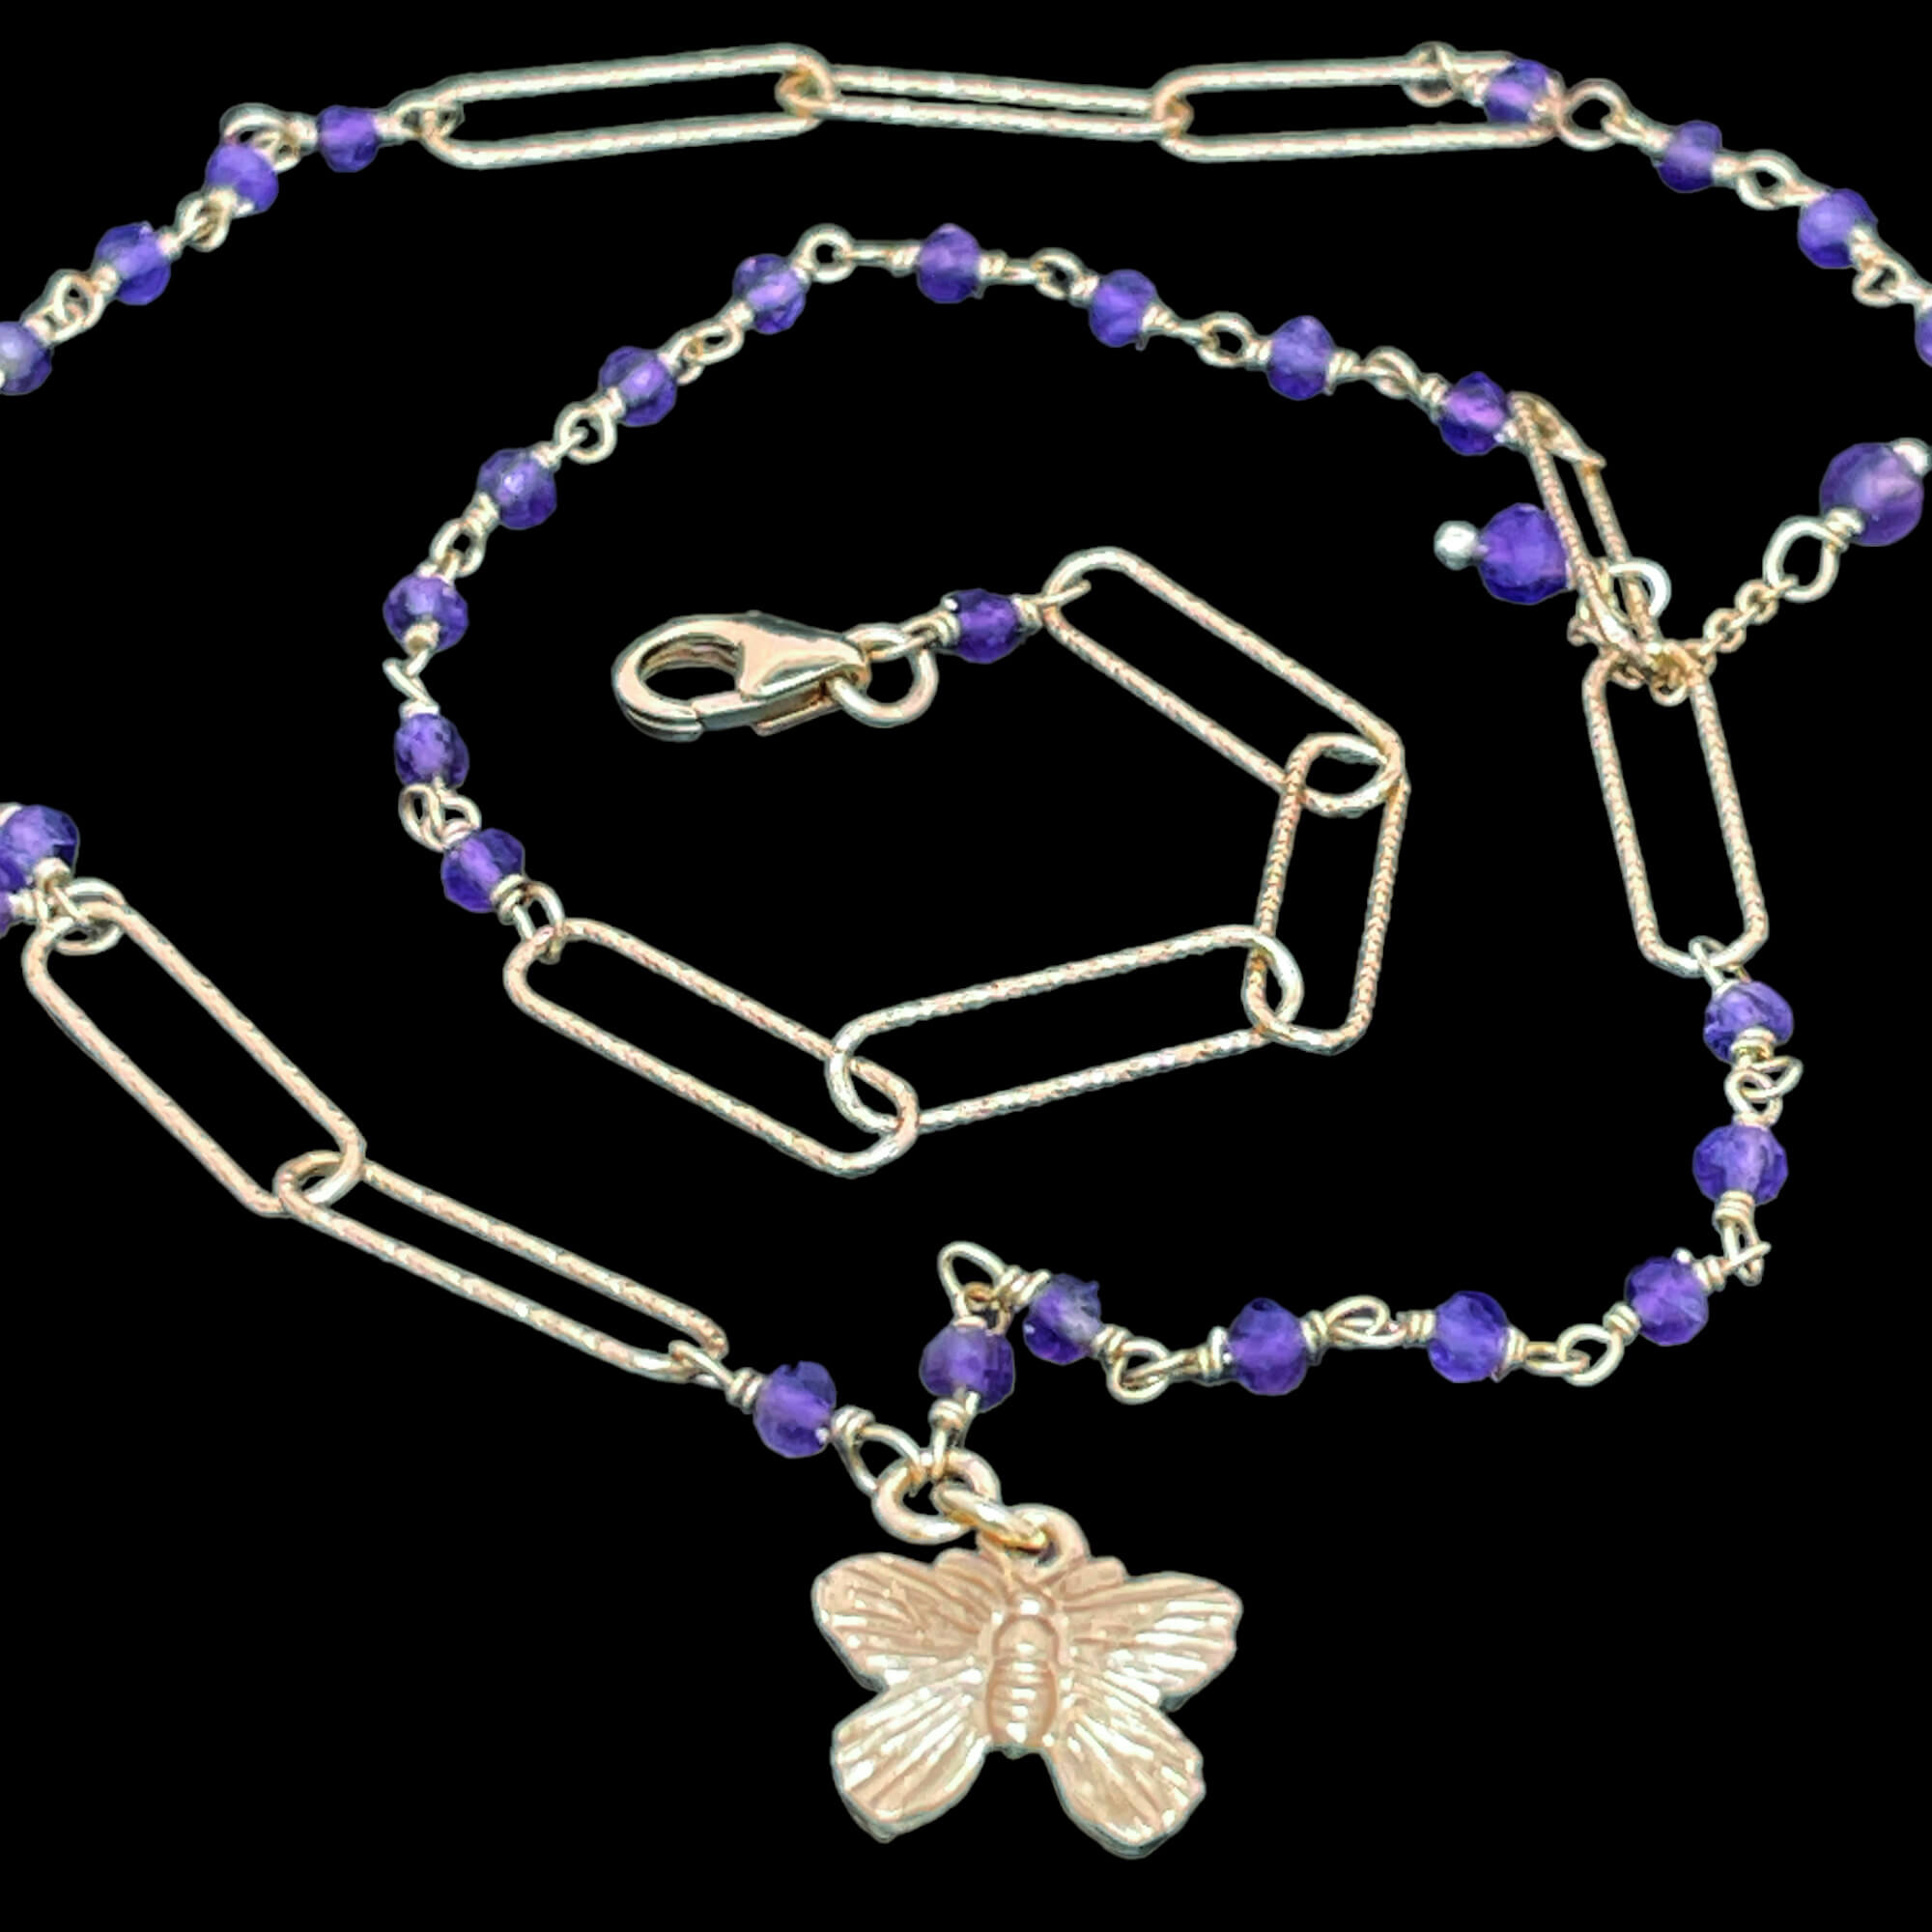 Gilded chain with amethyst stones and a butterfly